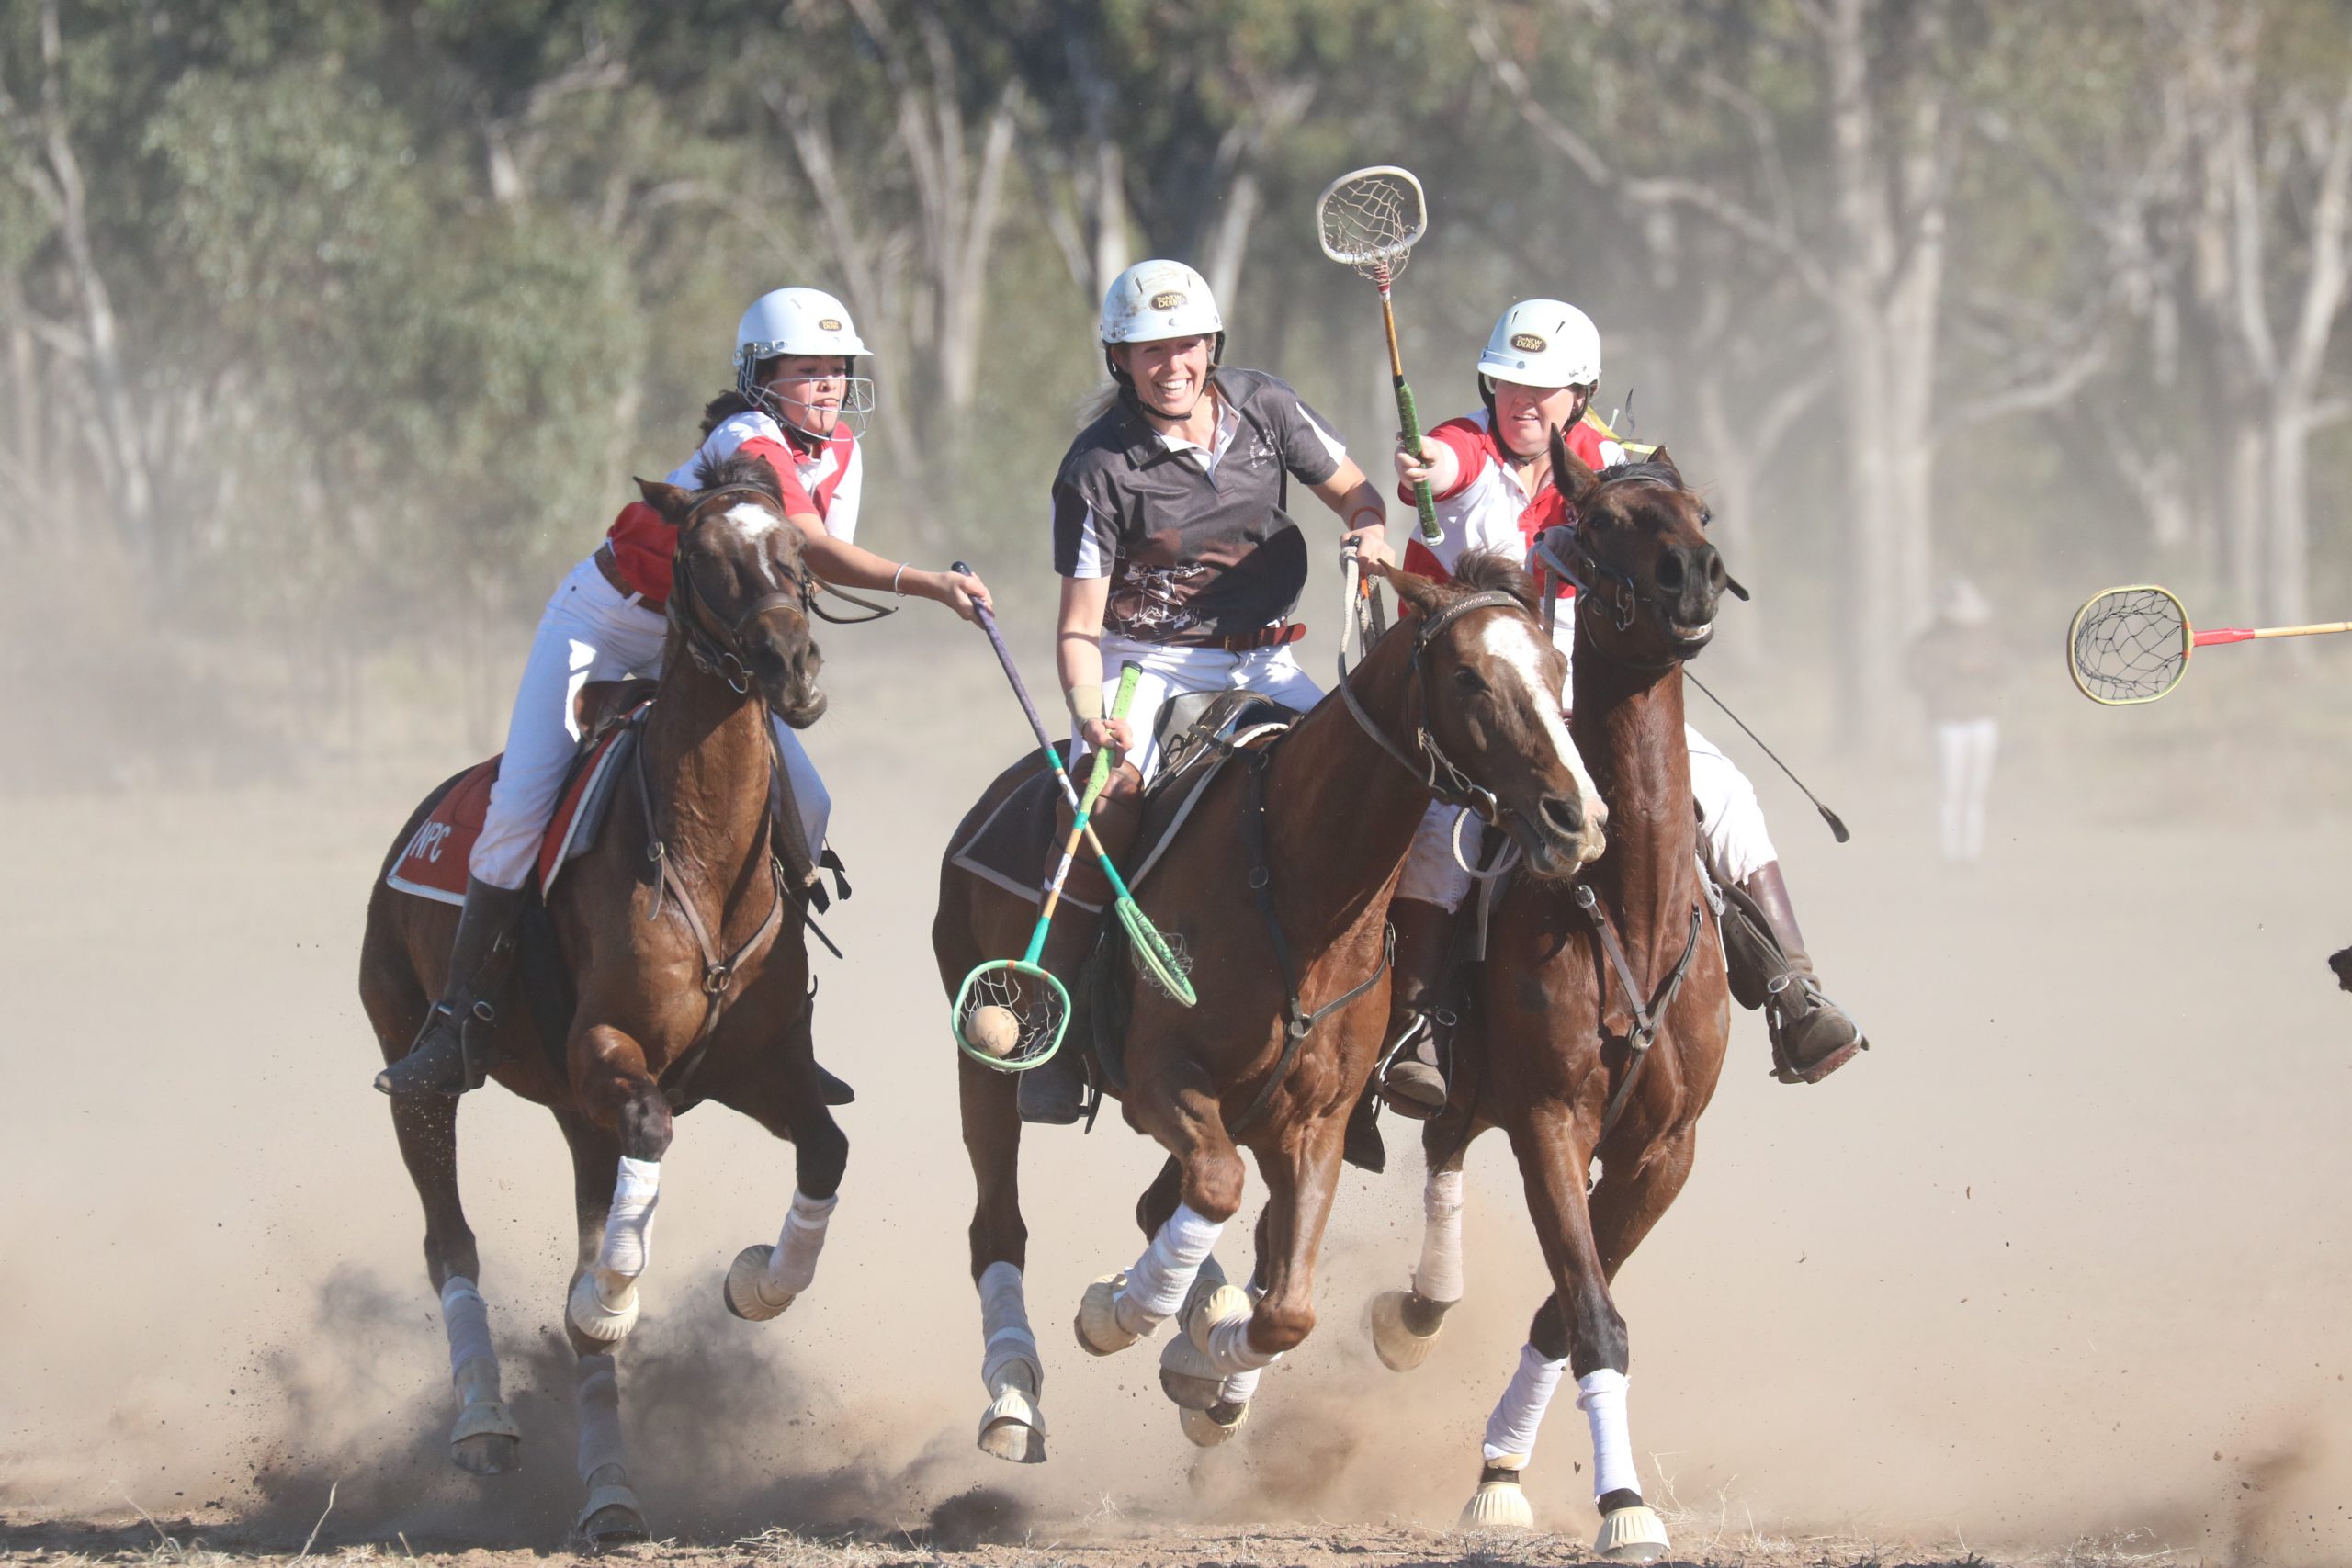 Narrabri and Gully polocrosse clubs cancel their carnivals